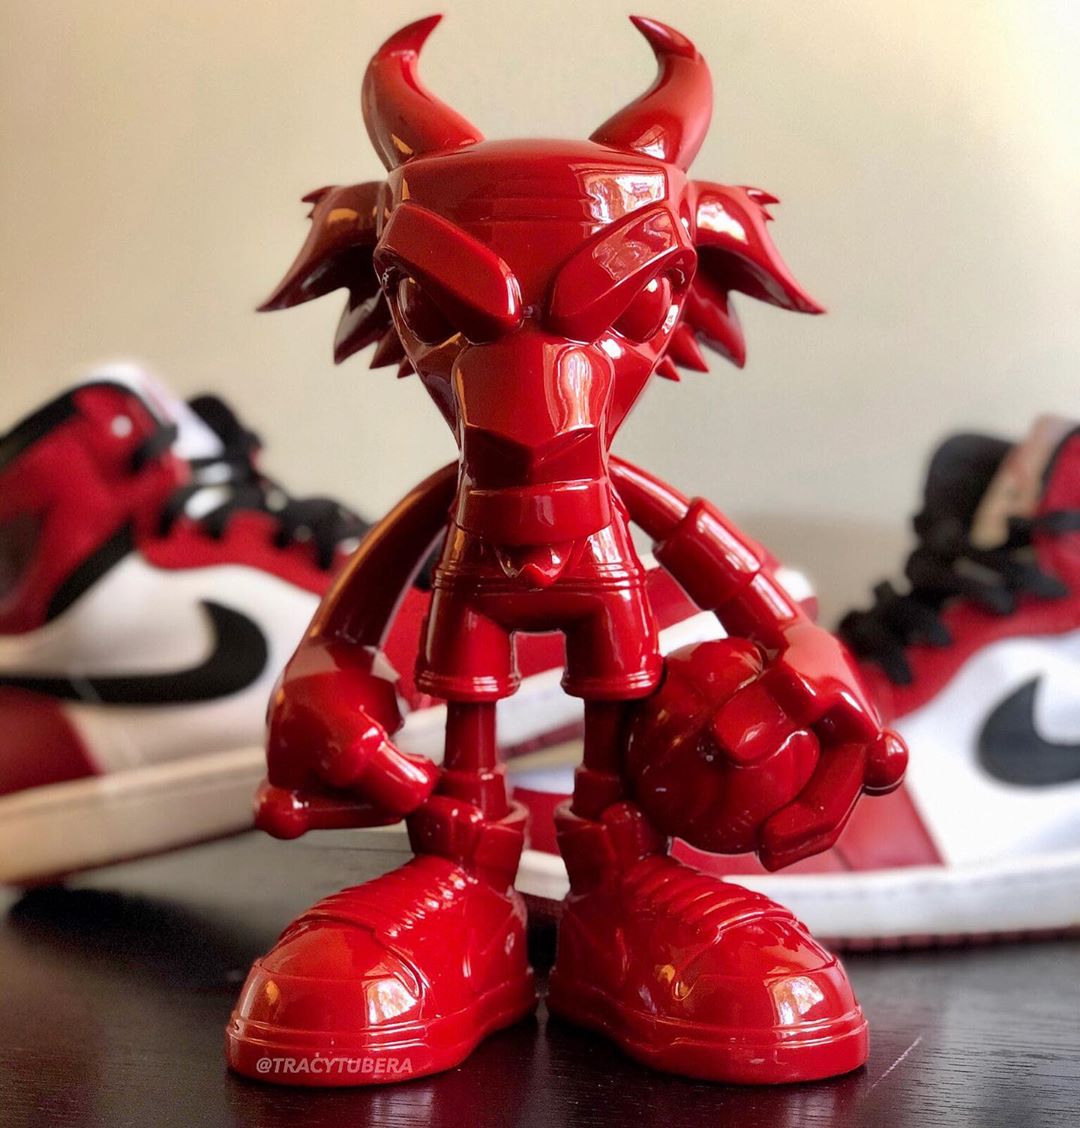 The G.O.A.T. Chicago Edition resin art toy by Tracy Tubera and Mana Studios